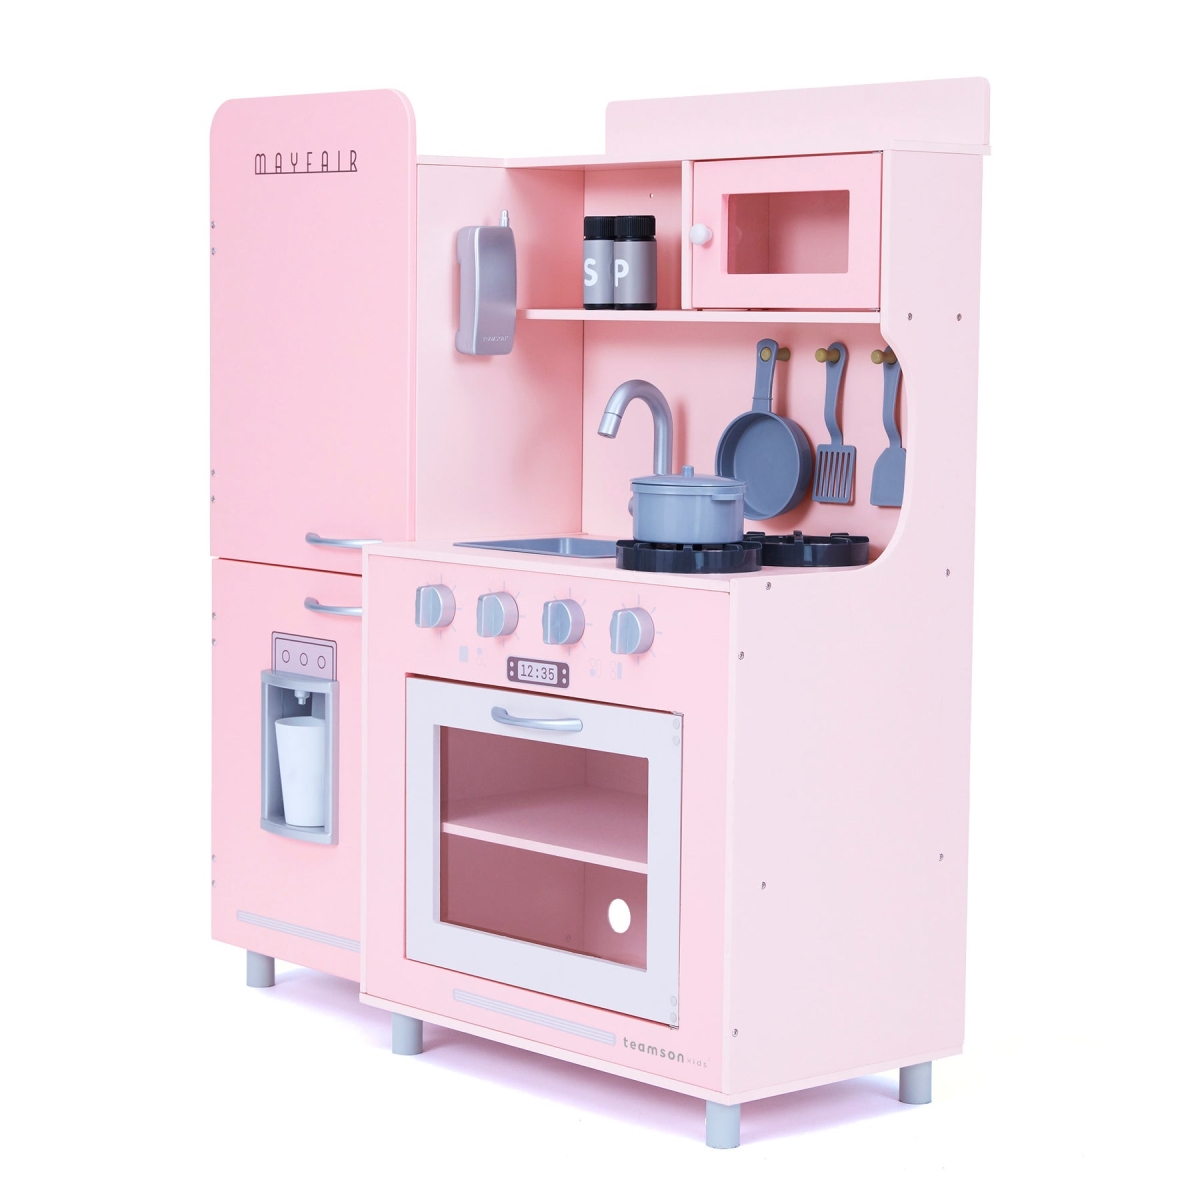 Picture of Teamson TD-13302A Kids Little Chef Mayfair Retro Play Kitchen with Accessories, Pink